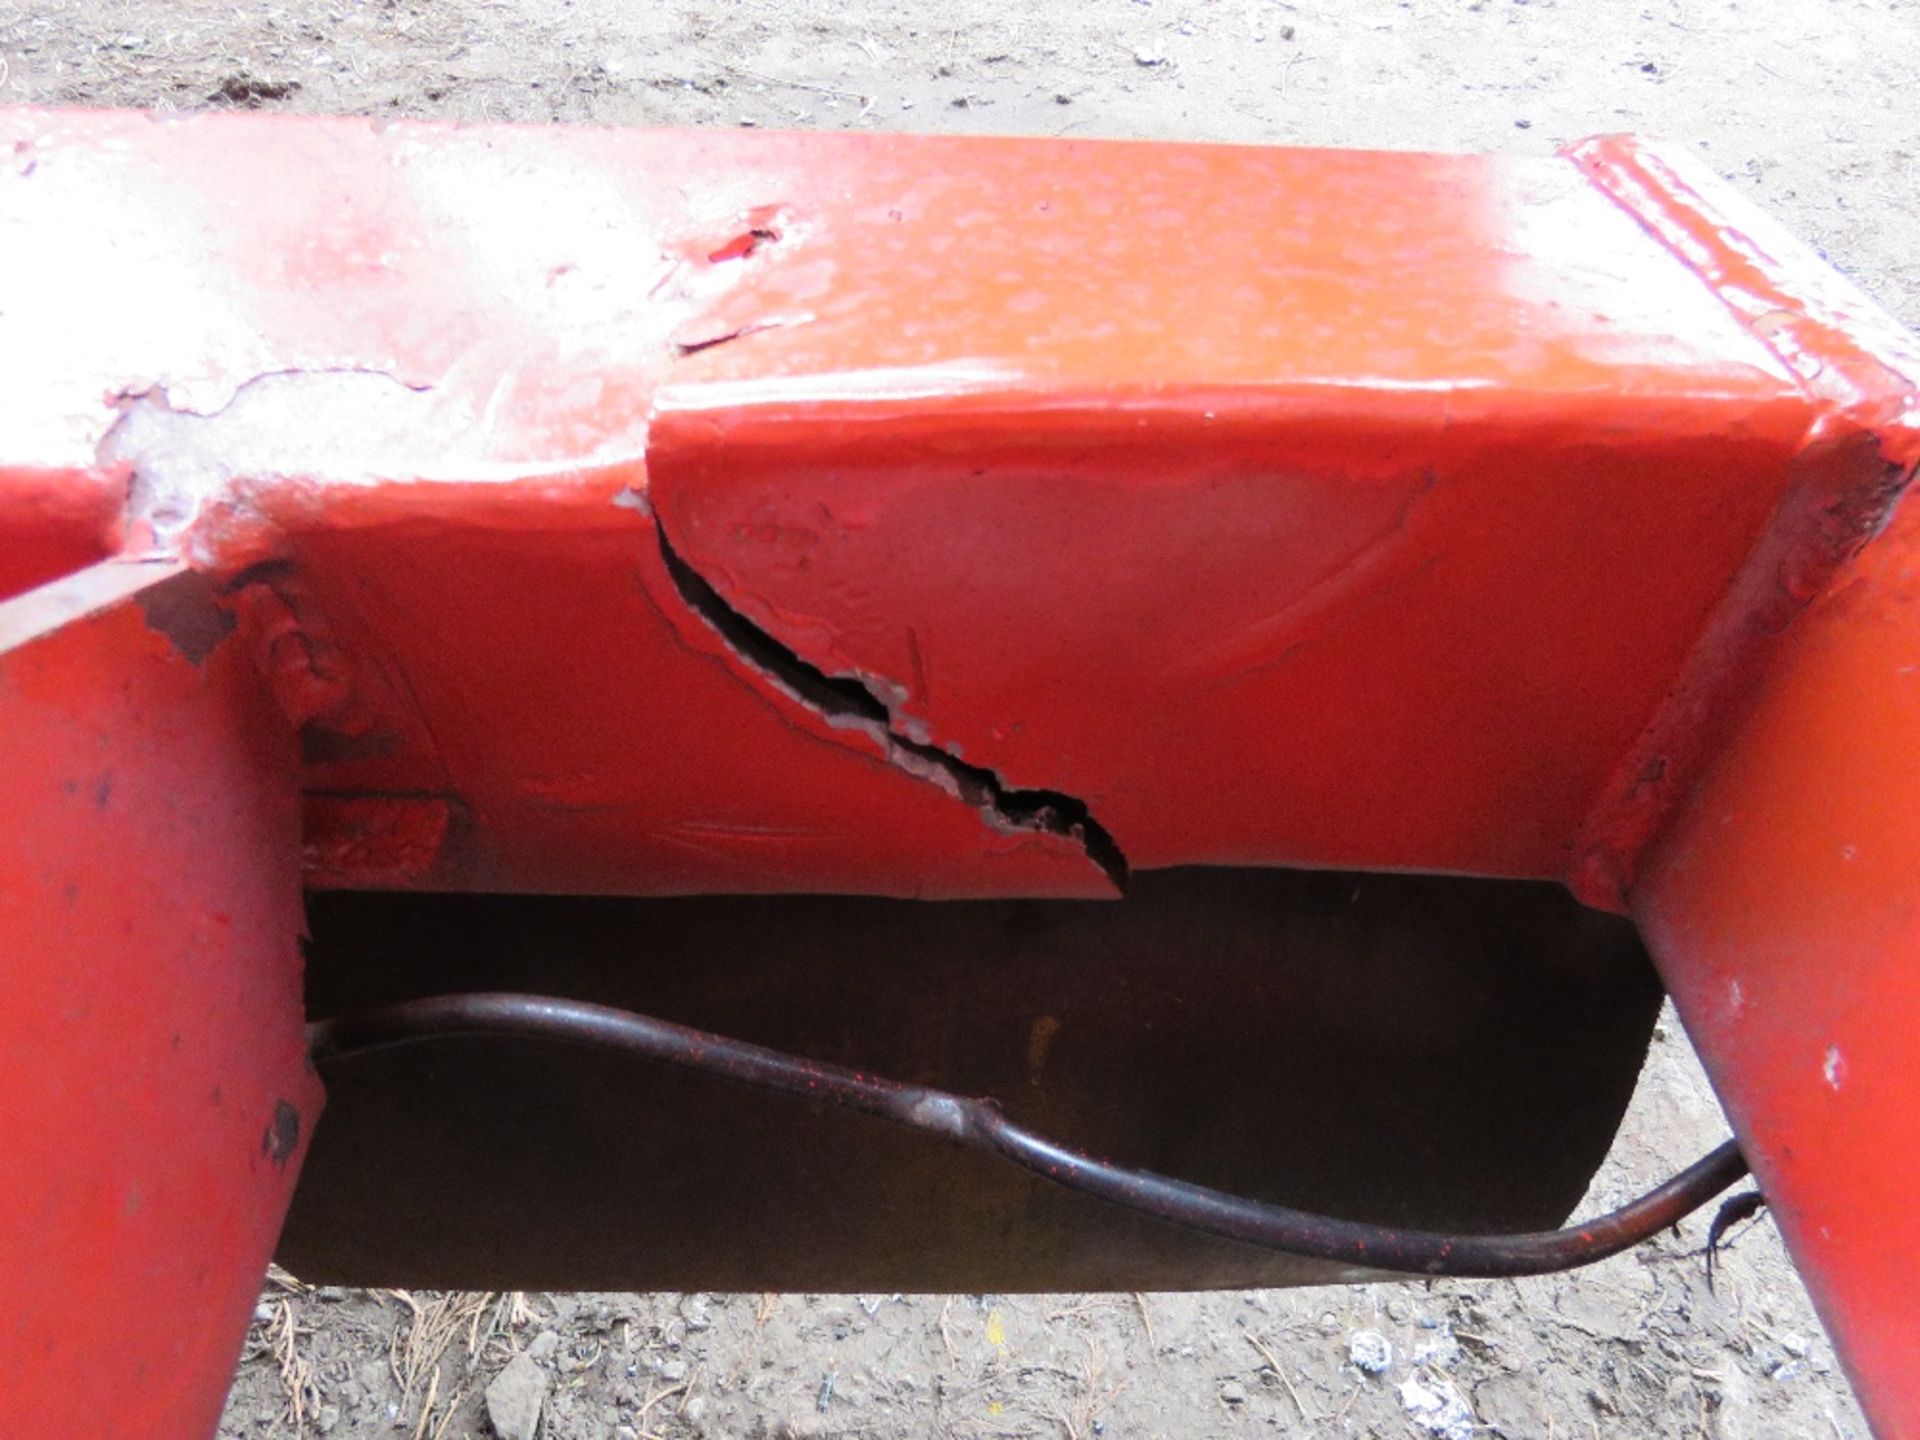 TRIMAX 728-610-400 BATWING TYPE ROLLER MOWER, YEAR 2017. PEGASUS S3 HEADS. NB: REQUIRES REPAIR TO CH - Image 14 of 14